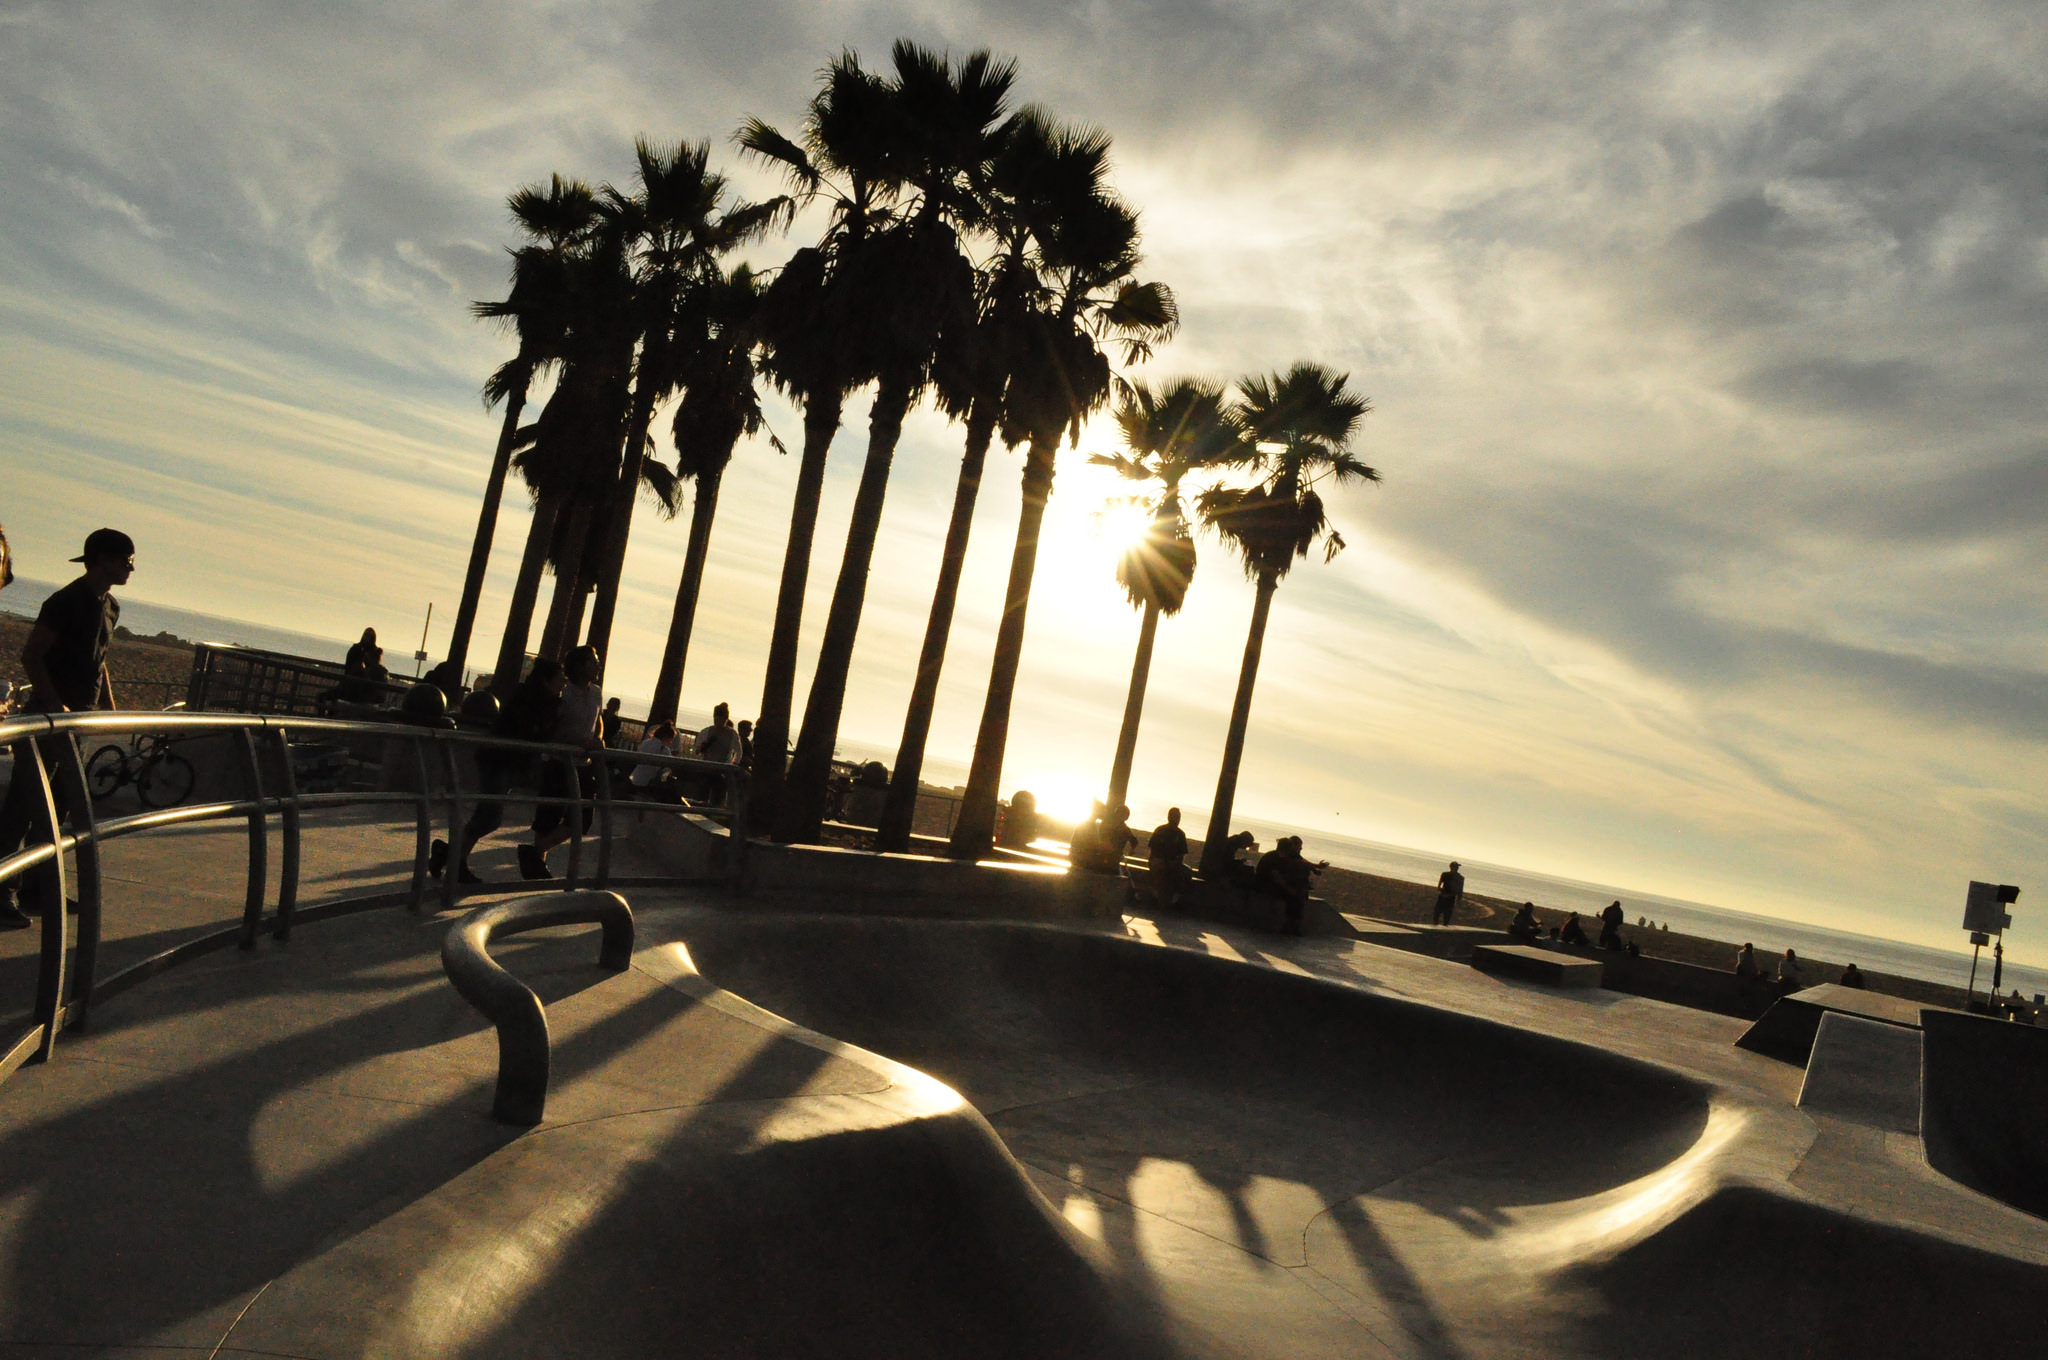 Some of The Best Day Trips in Los Angeles are Santa Monica and Venice